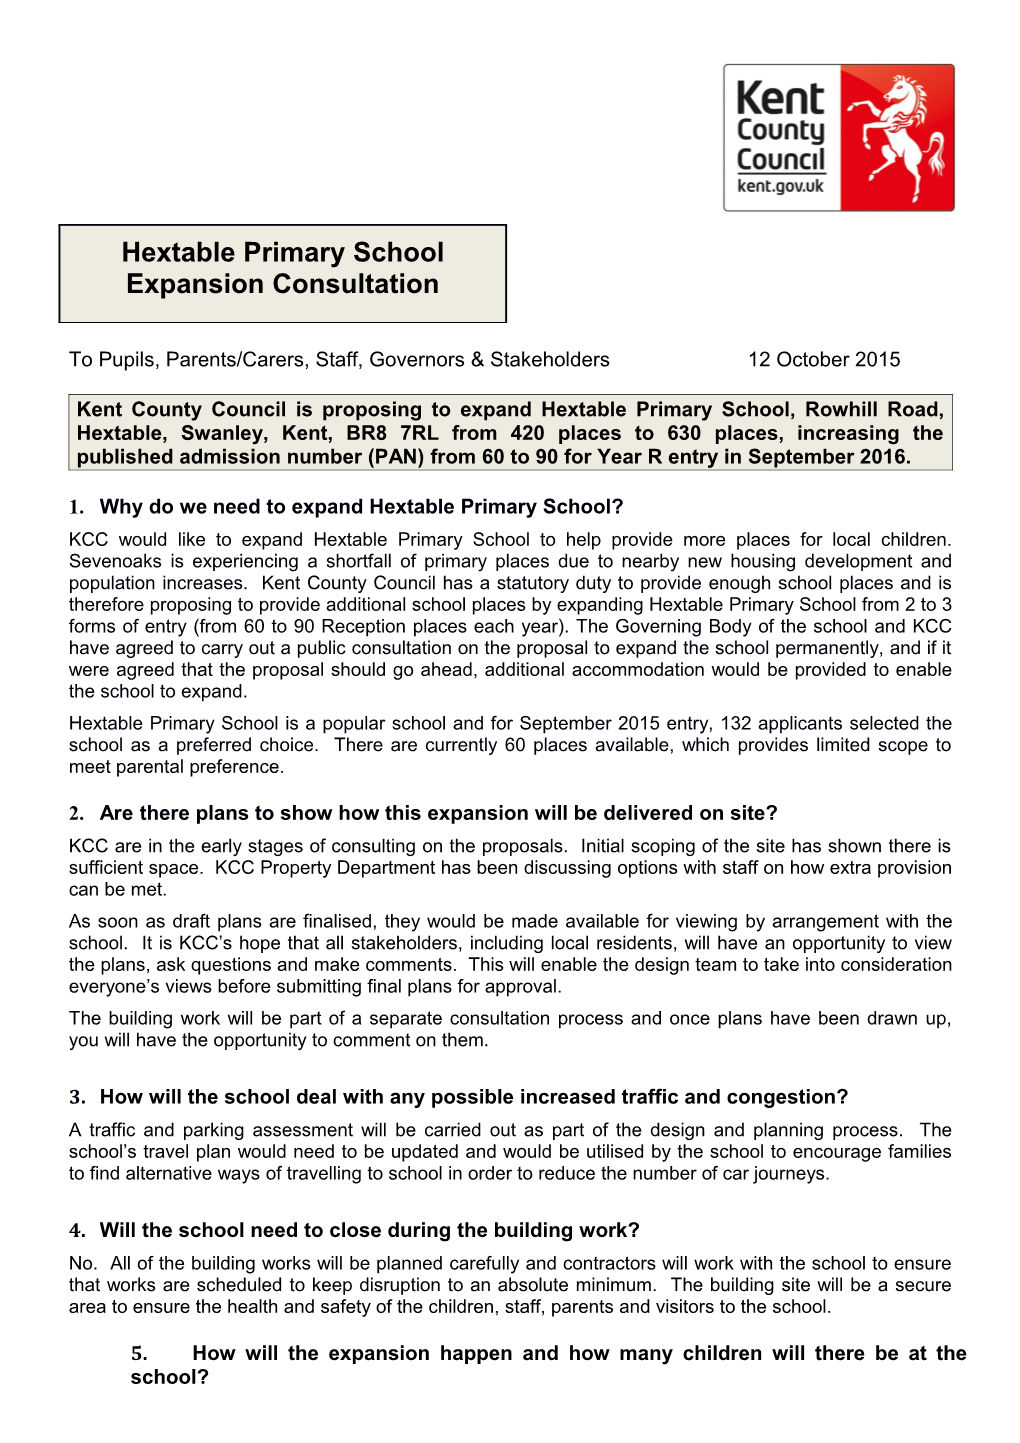 1.Why Do We Need to Expand Hextable Primary School?